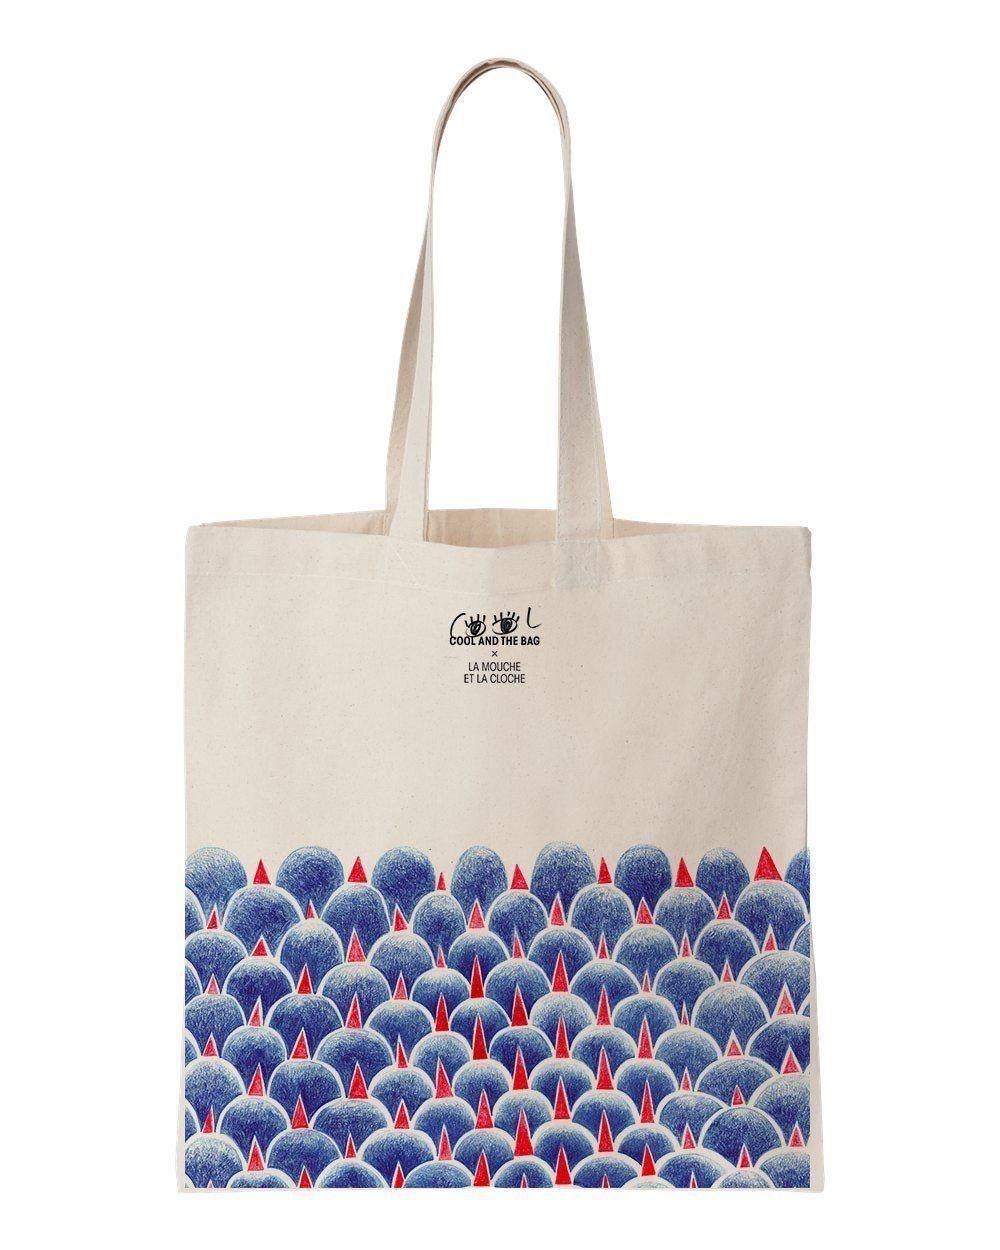 Fly Eyes Printed Tote Bag Gift For Girls